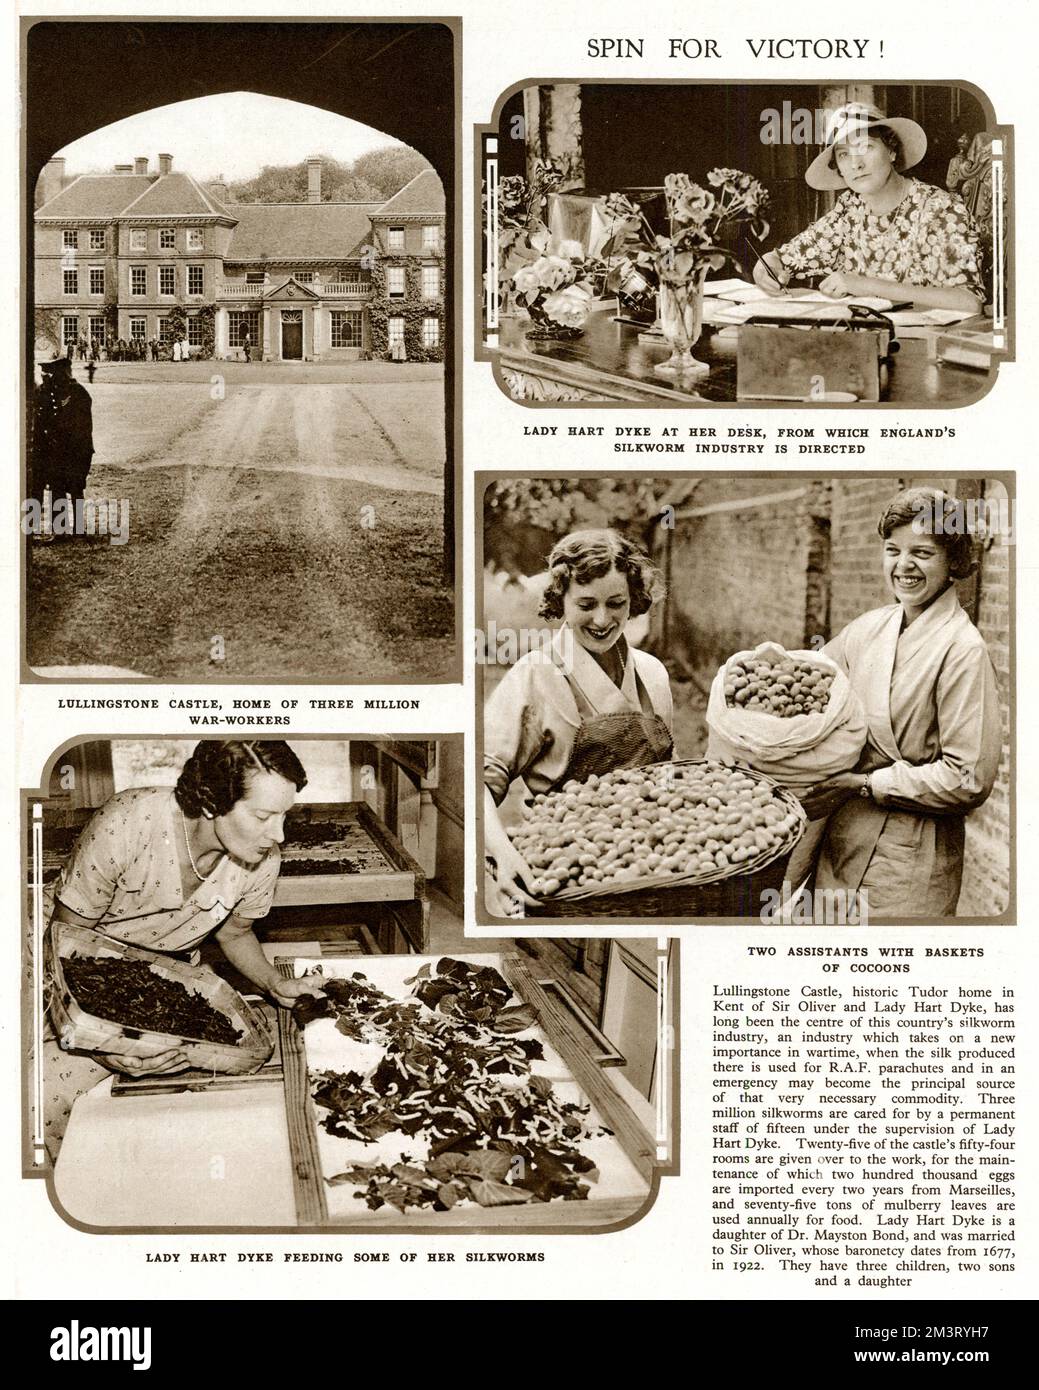 Page from The Tatler reporting on the silk production there overseen by Lady Hart Dyke.  Three million silkworms were cared for by a permanent staff of fifteen with twenty five of the castle's fifty four rooms given over to the work, which had increased due to the silk required for RAF parachutes. Lullingstone later provided silk for the wedding dress of Princess Elizabeth (Queen Elizabeth II) to Prince Philip in 1947. The silkworms were imported from China rather than Italy - for patriotic reasons!     Date: 1940 Stock Photo